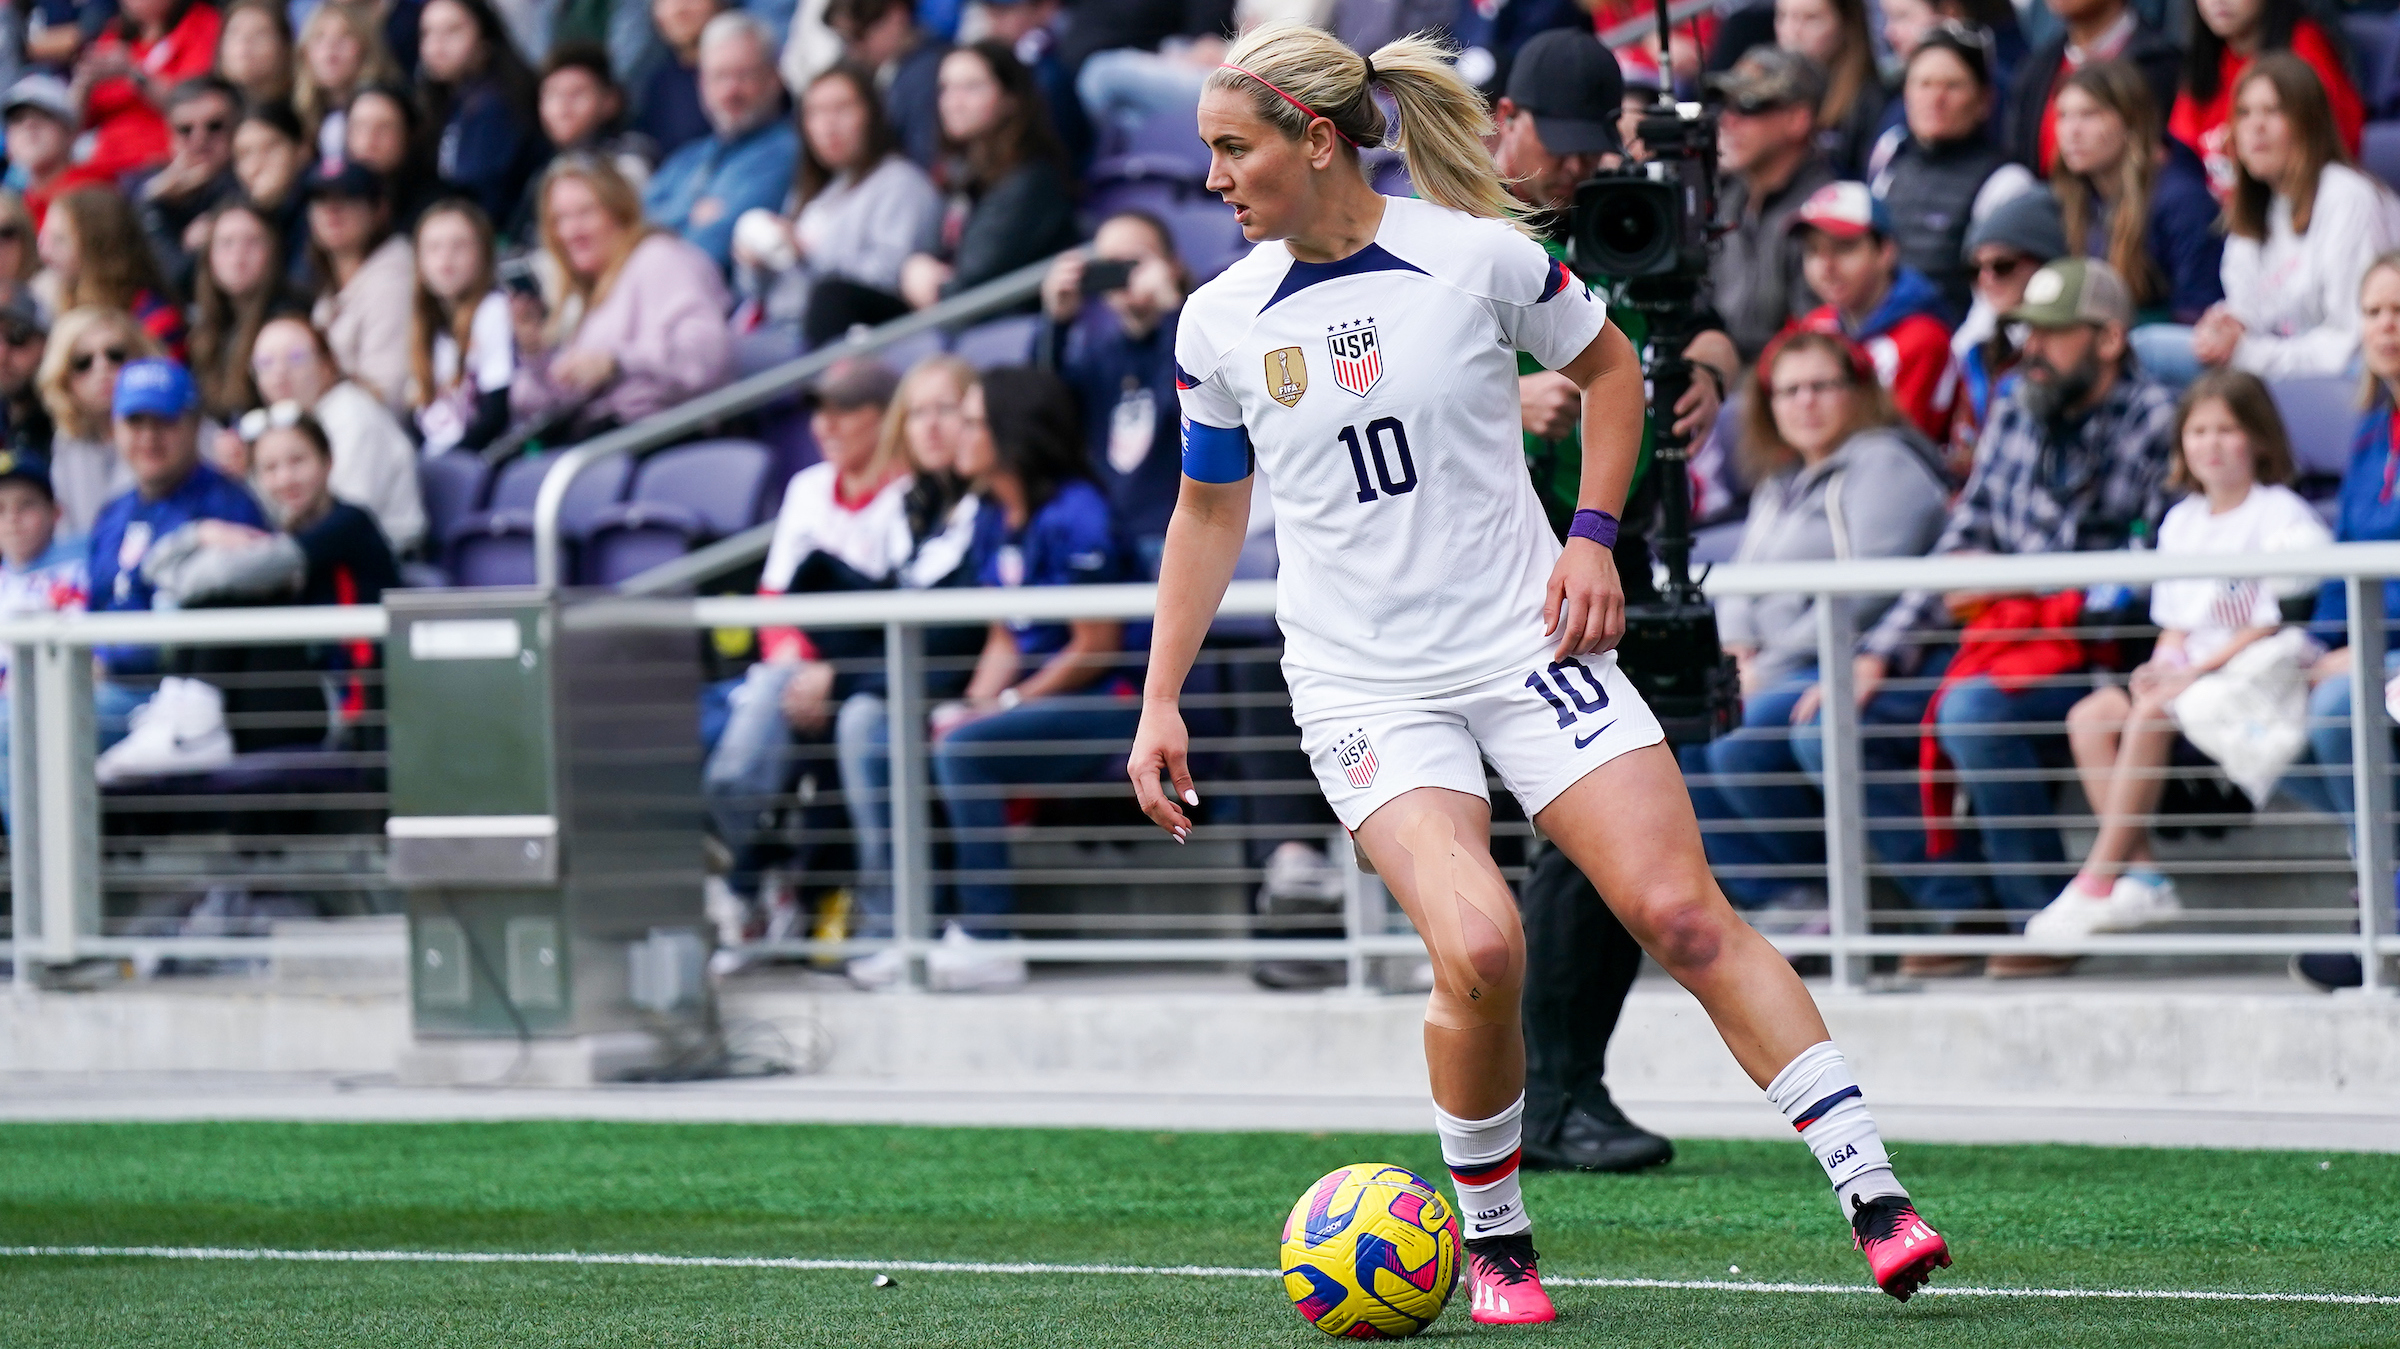 USWNT to host South Africa for post-World Cup friendlies in Cincinnati and Chicago